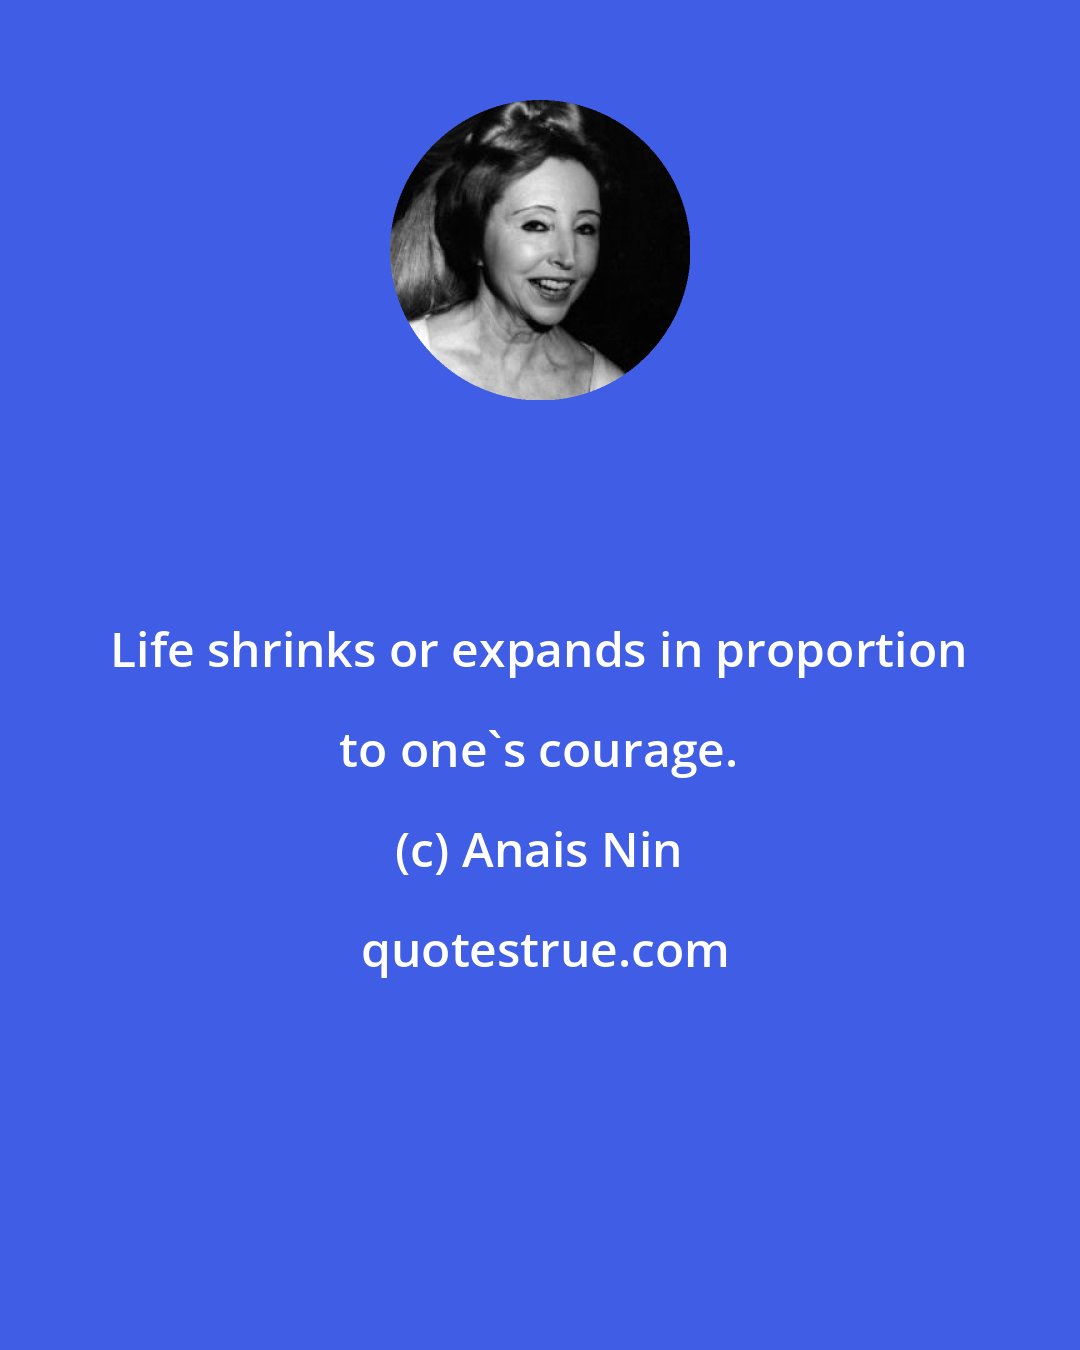 Anais Nin: Life shrinks or expands in proportion to one's courage.